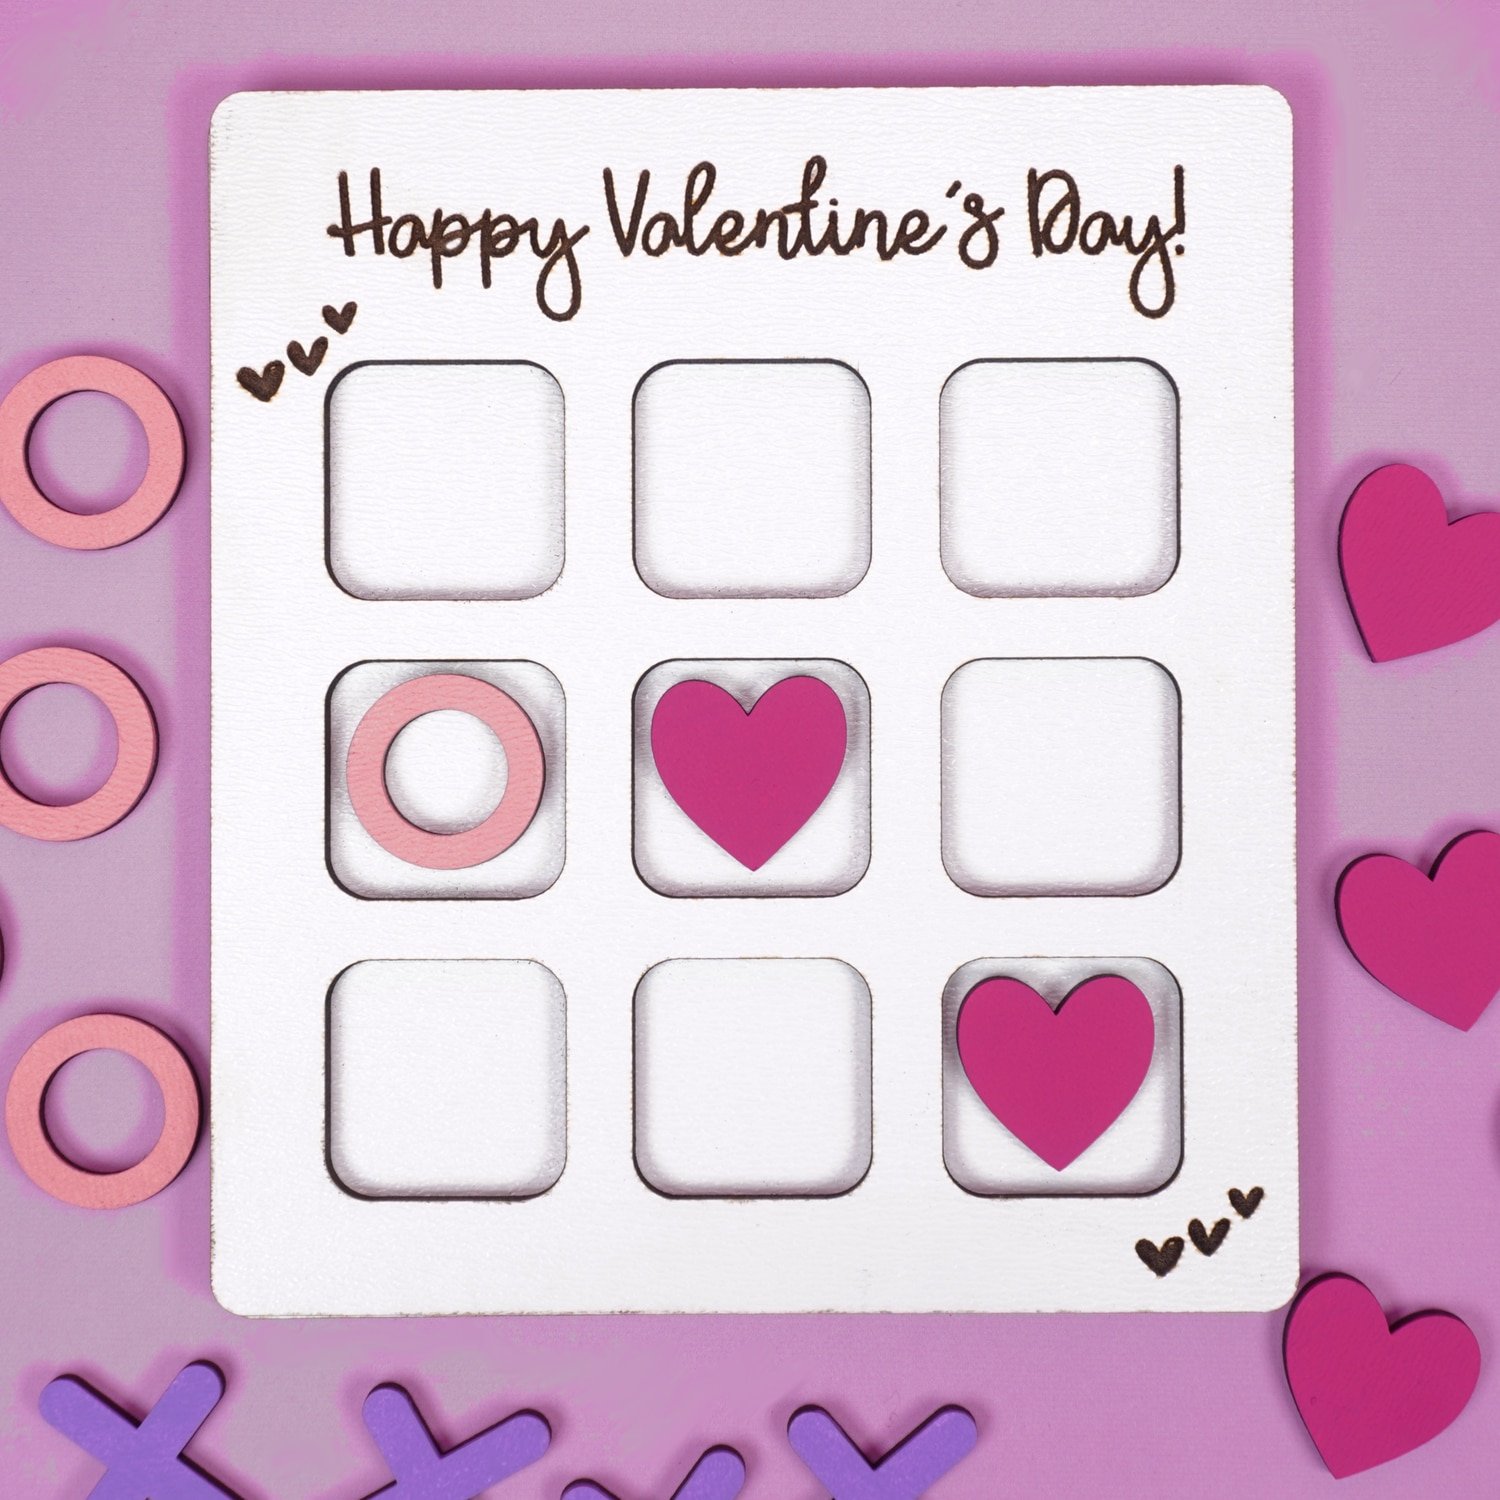 Valentine Tic Tac Toe game made with Glowforge laser SVG on a purple background with X's, O's, and pink hearts